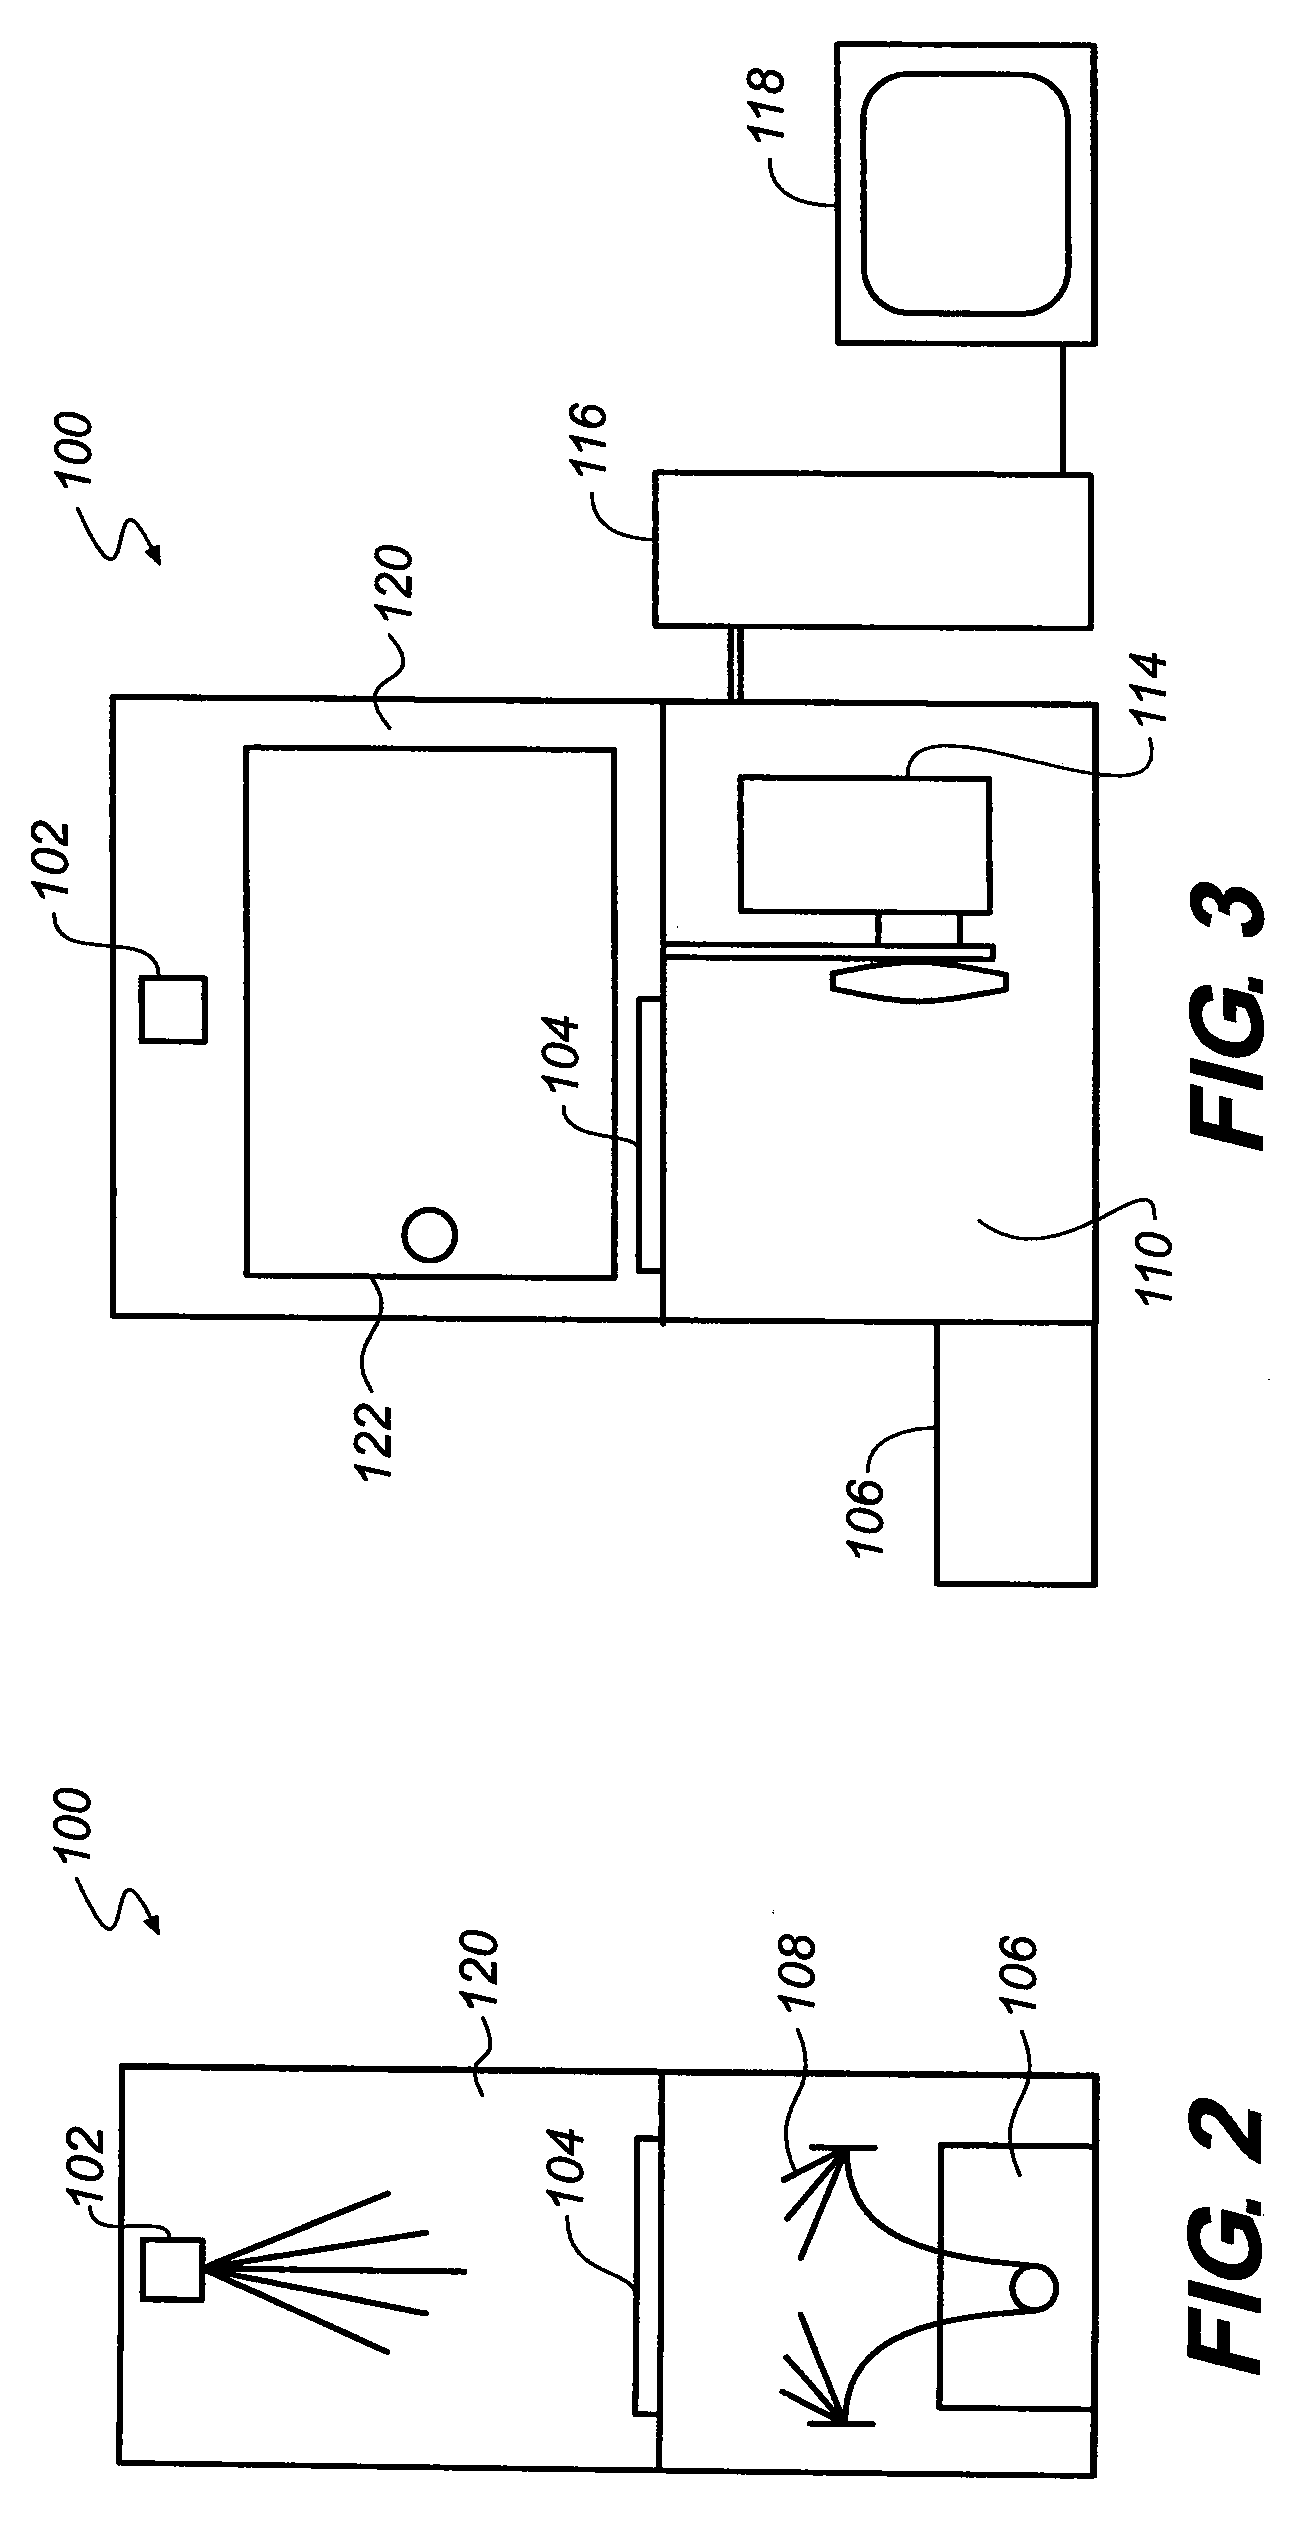 Apparatus and method for external fluorescence imaging of internal regions of interest in a small animal using an endoscope for internal illumination